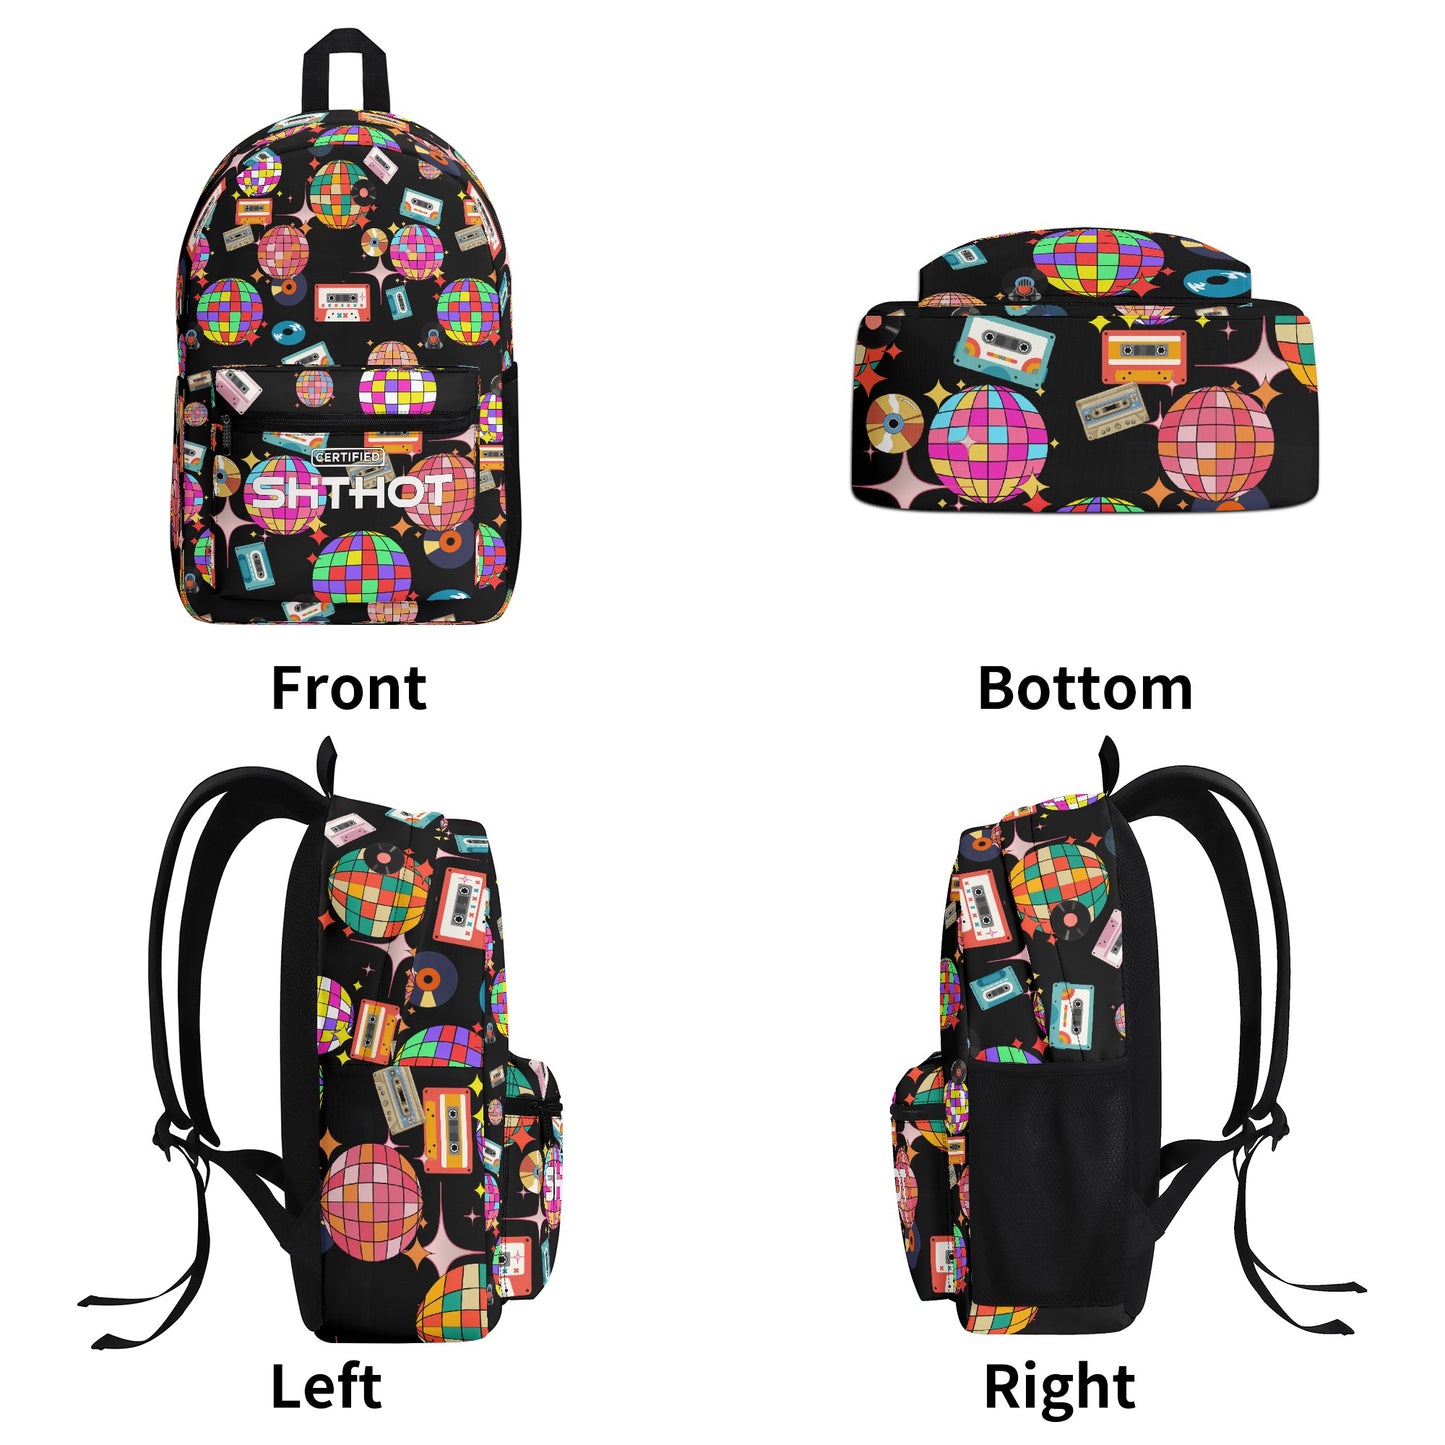 Certified ShitHot Backpack - Rhythm